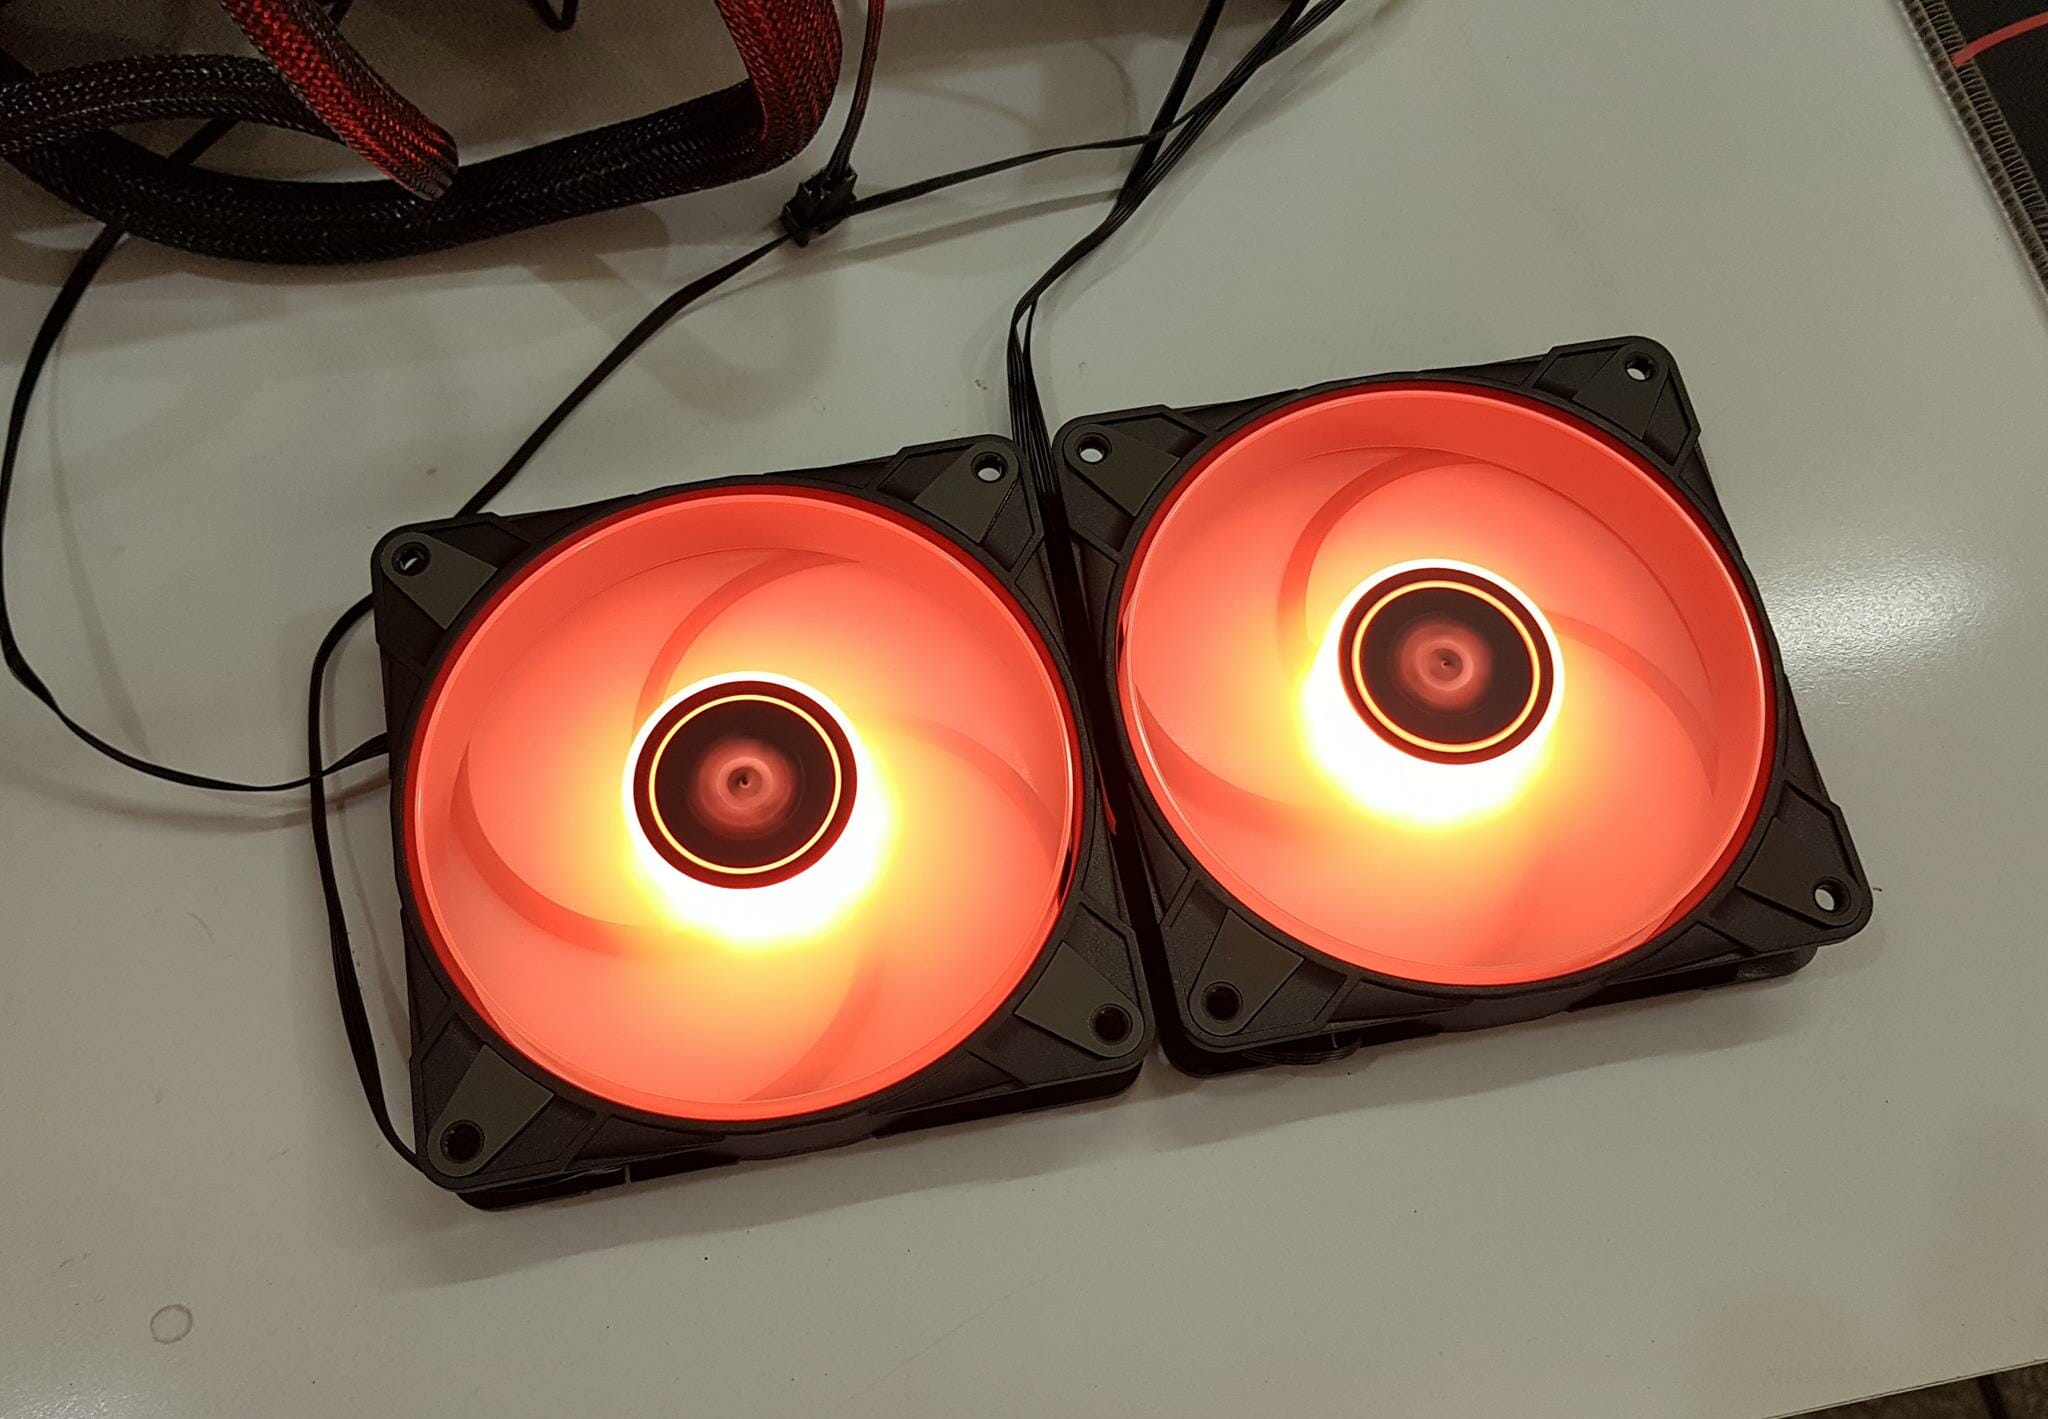 Arctic P12 PWM PST Fan Review - The best budget (and not only) fan